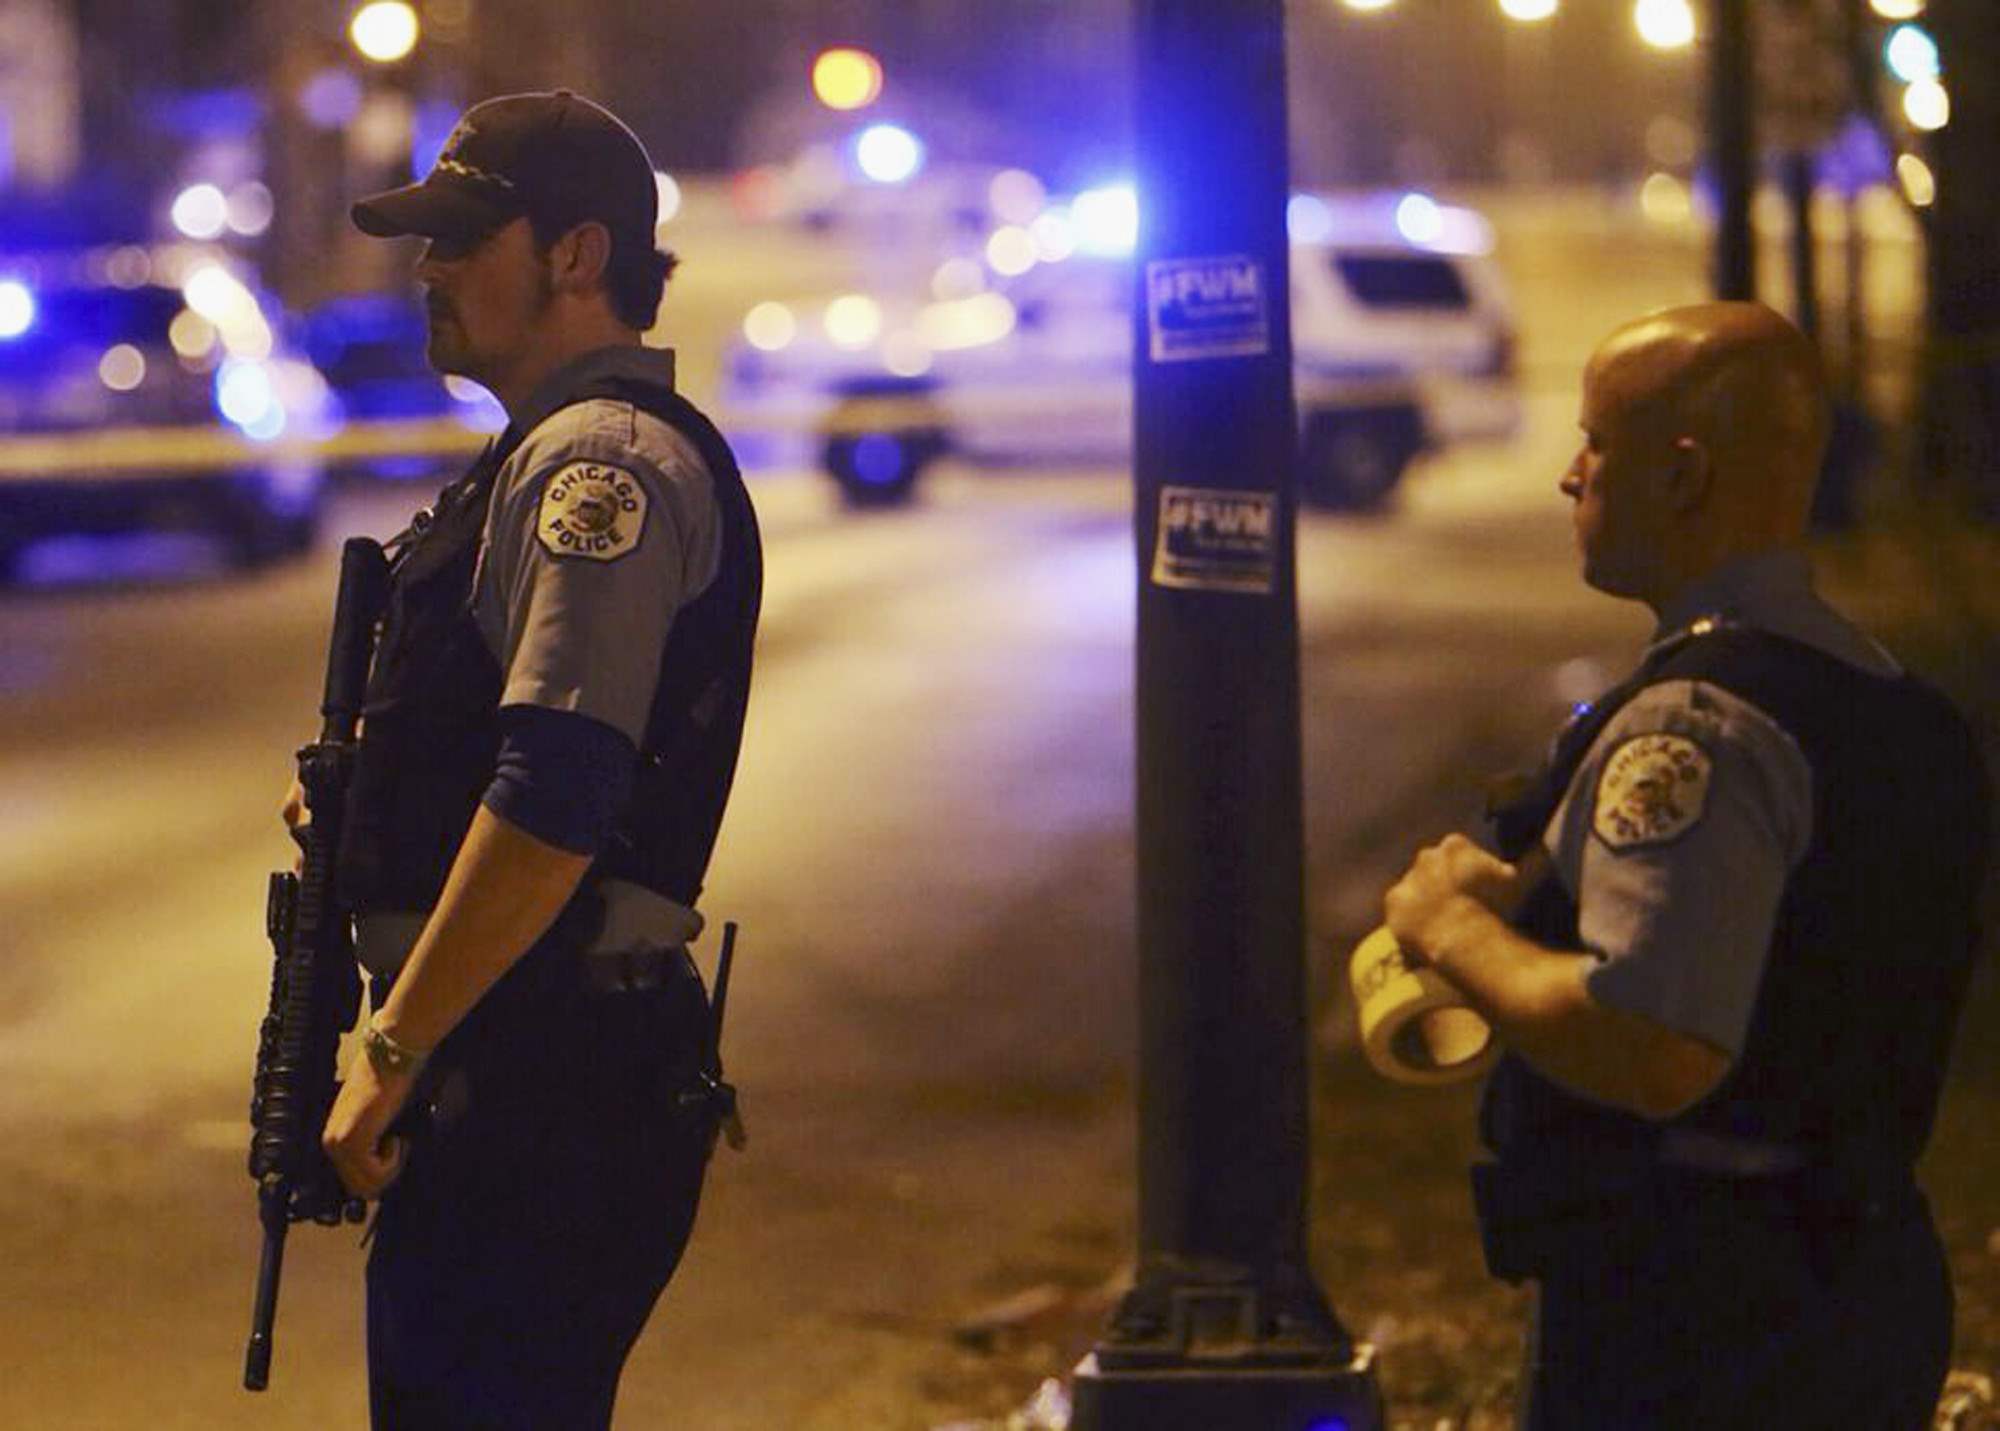 In this Sunday, April 20, 2014 photo, Chicago police stand guard at the scene where five children, all 15 years old or younger, were shot and wounded in Chicago. Police said Monday that eight people were killed and 44 injured, including the five children, in weekend shootings. (AP Photo/Sun-Times Media, Brian Jackson) MANDATORY CREDIT, MAGS OUT, NO SALES ** Usable by LA and DC Only **